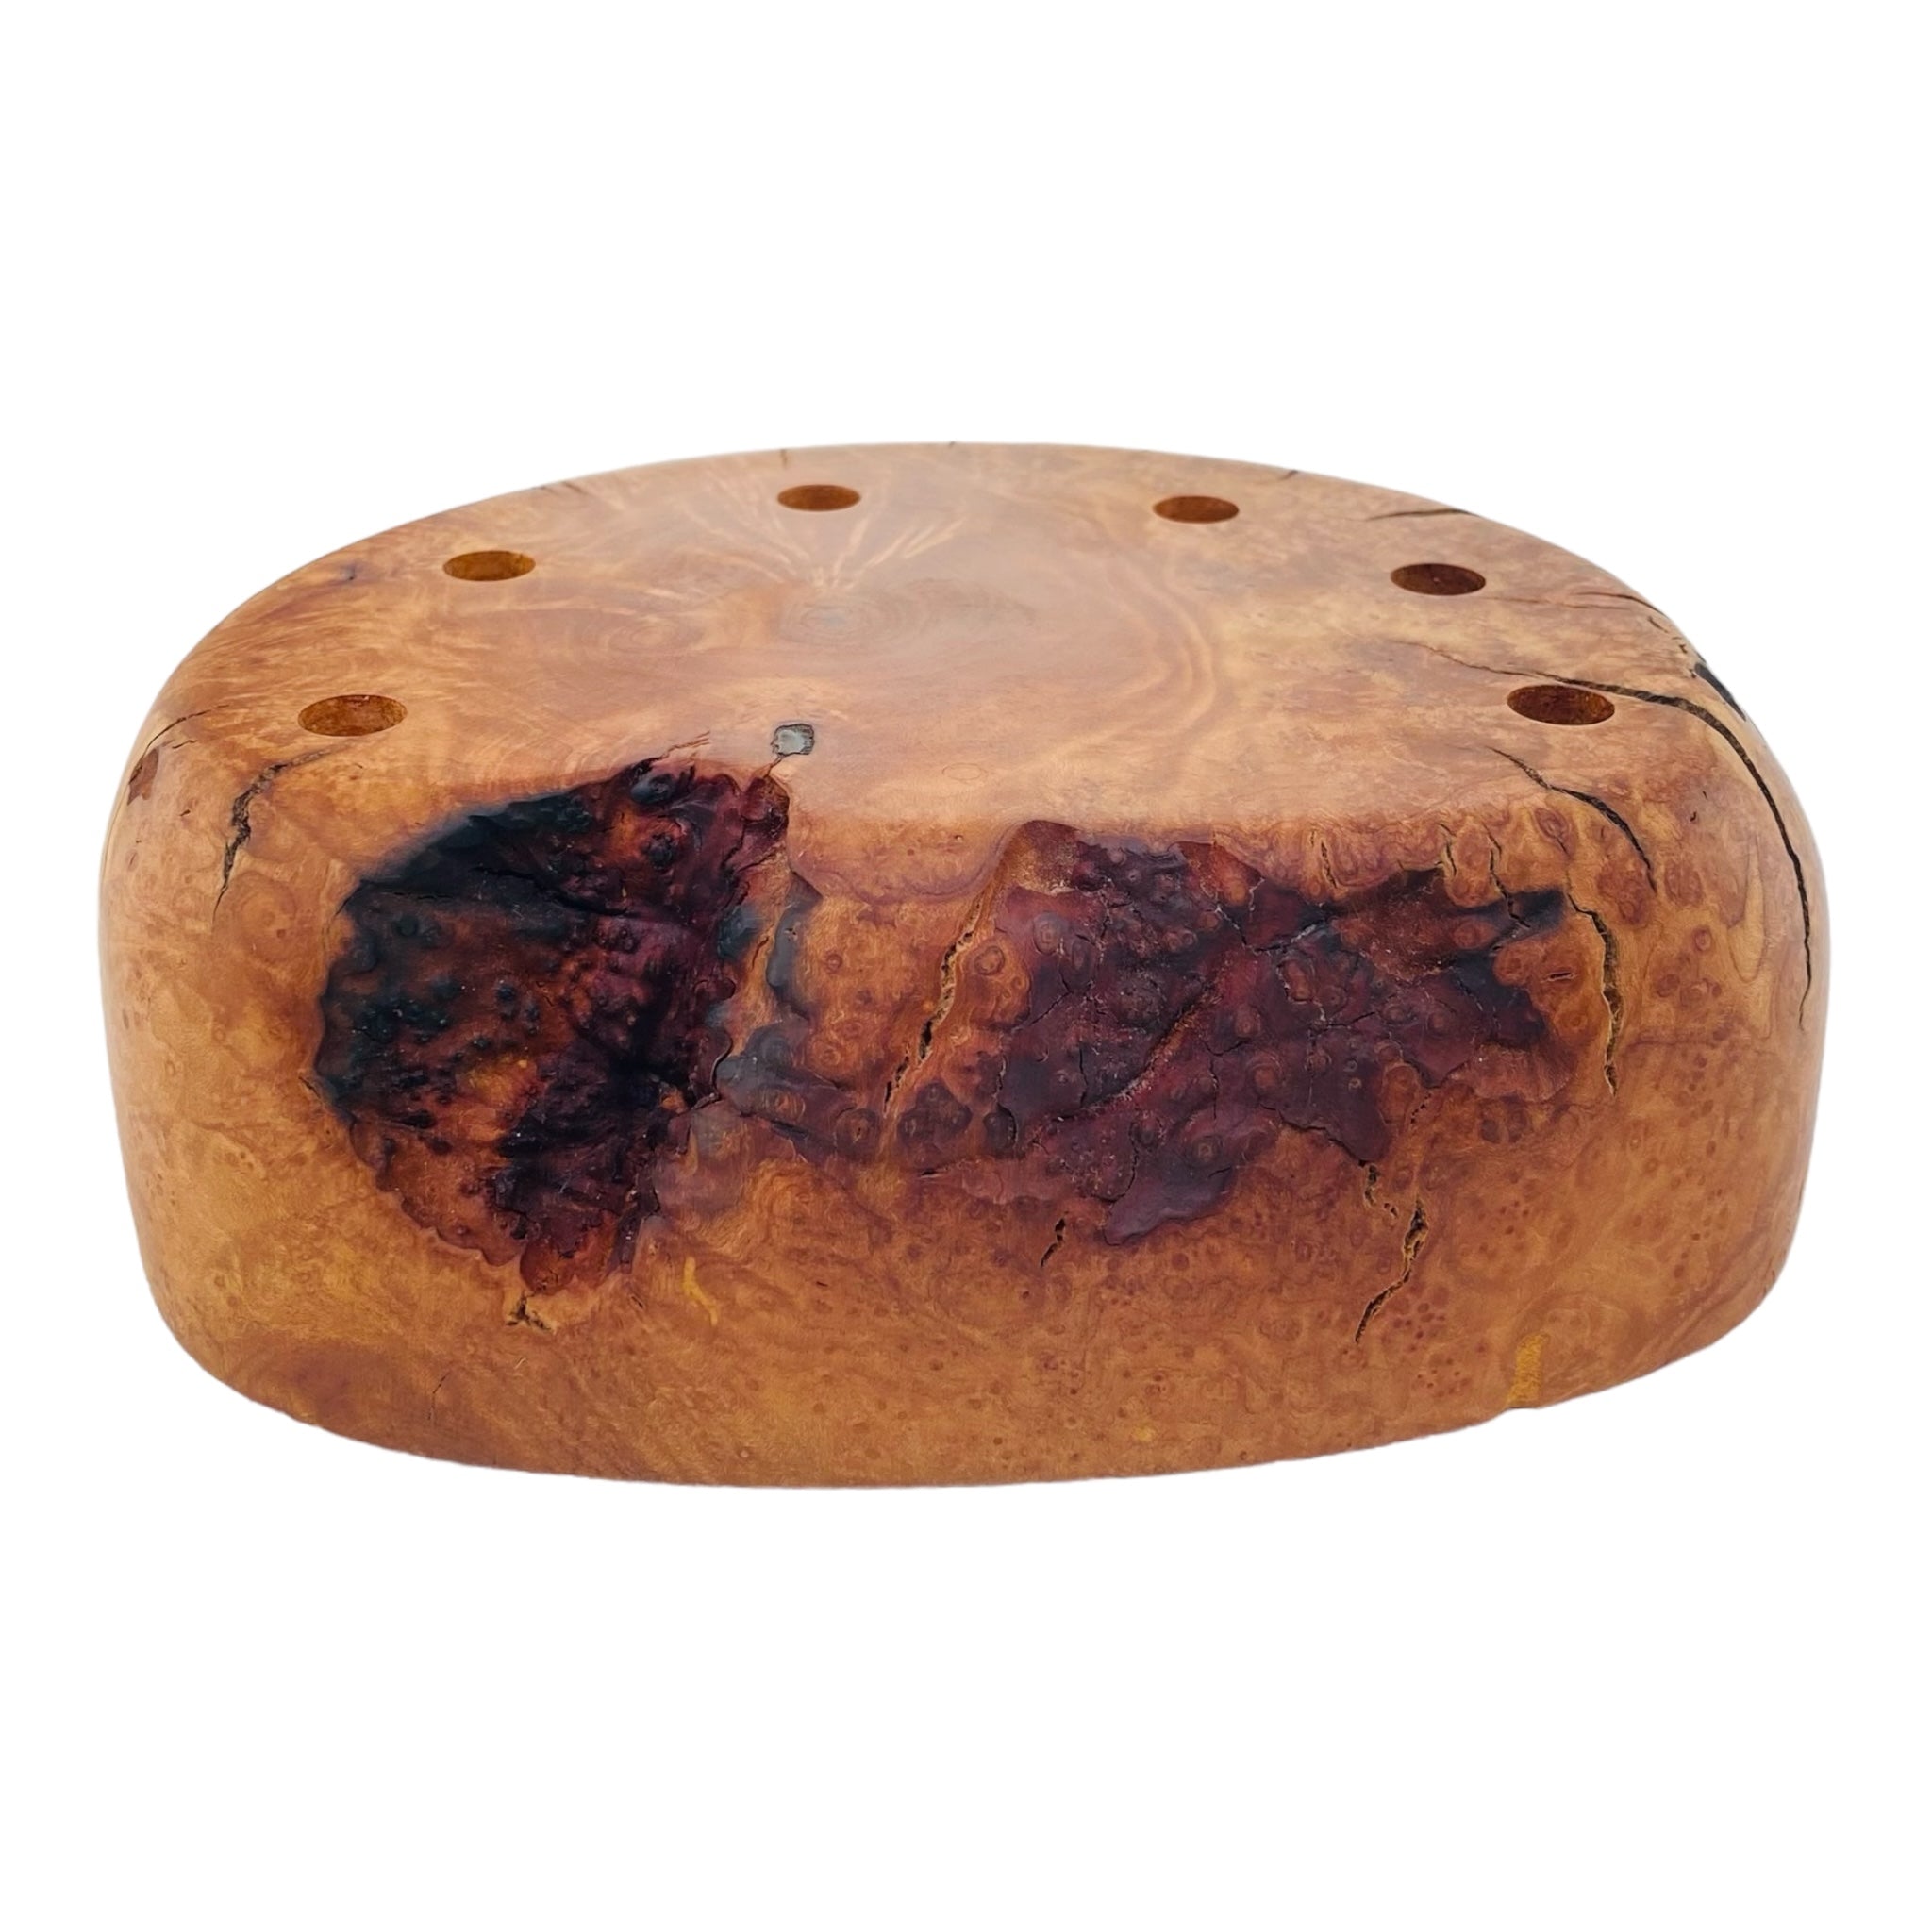 6 Hole Wood Display Stand Holder For 10mm Bong Bowl Pieces Or Quartz Bangers - Wild Fire Charred Manzanita Burl